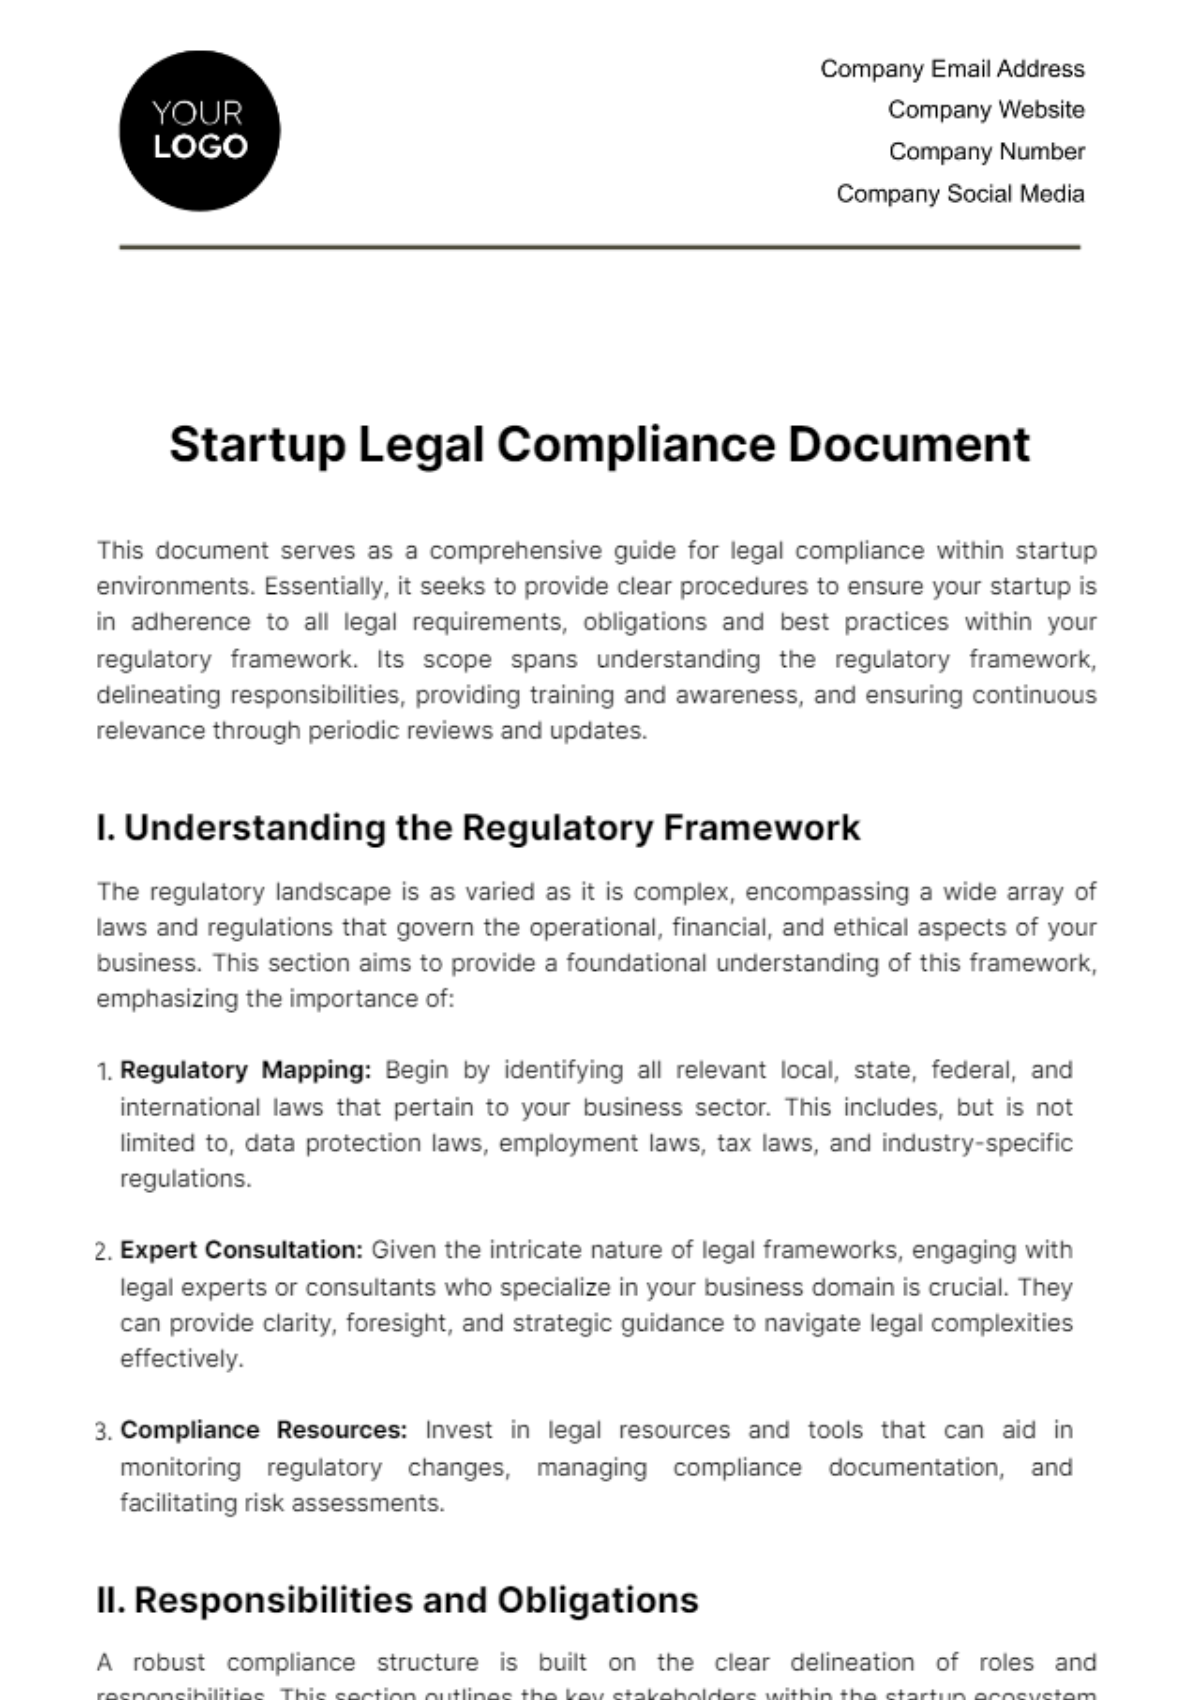 Startup Legal Compliance Document Template